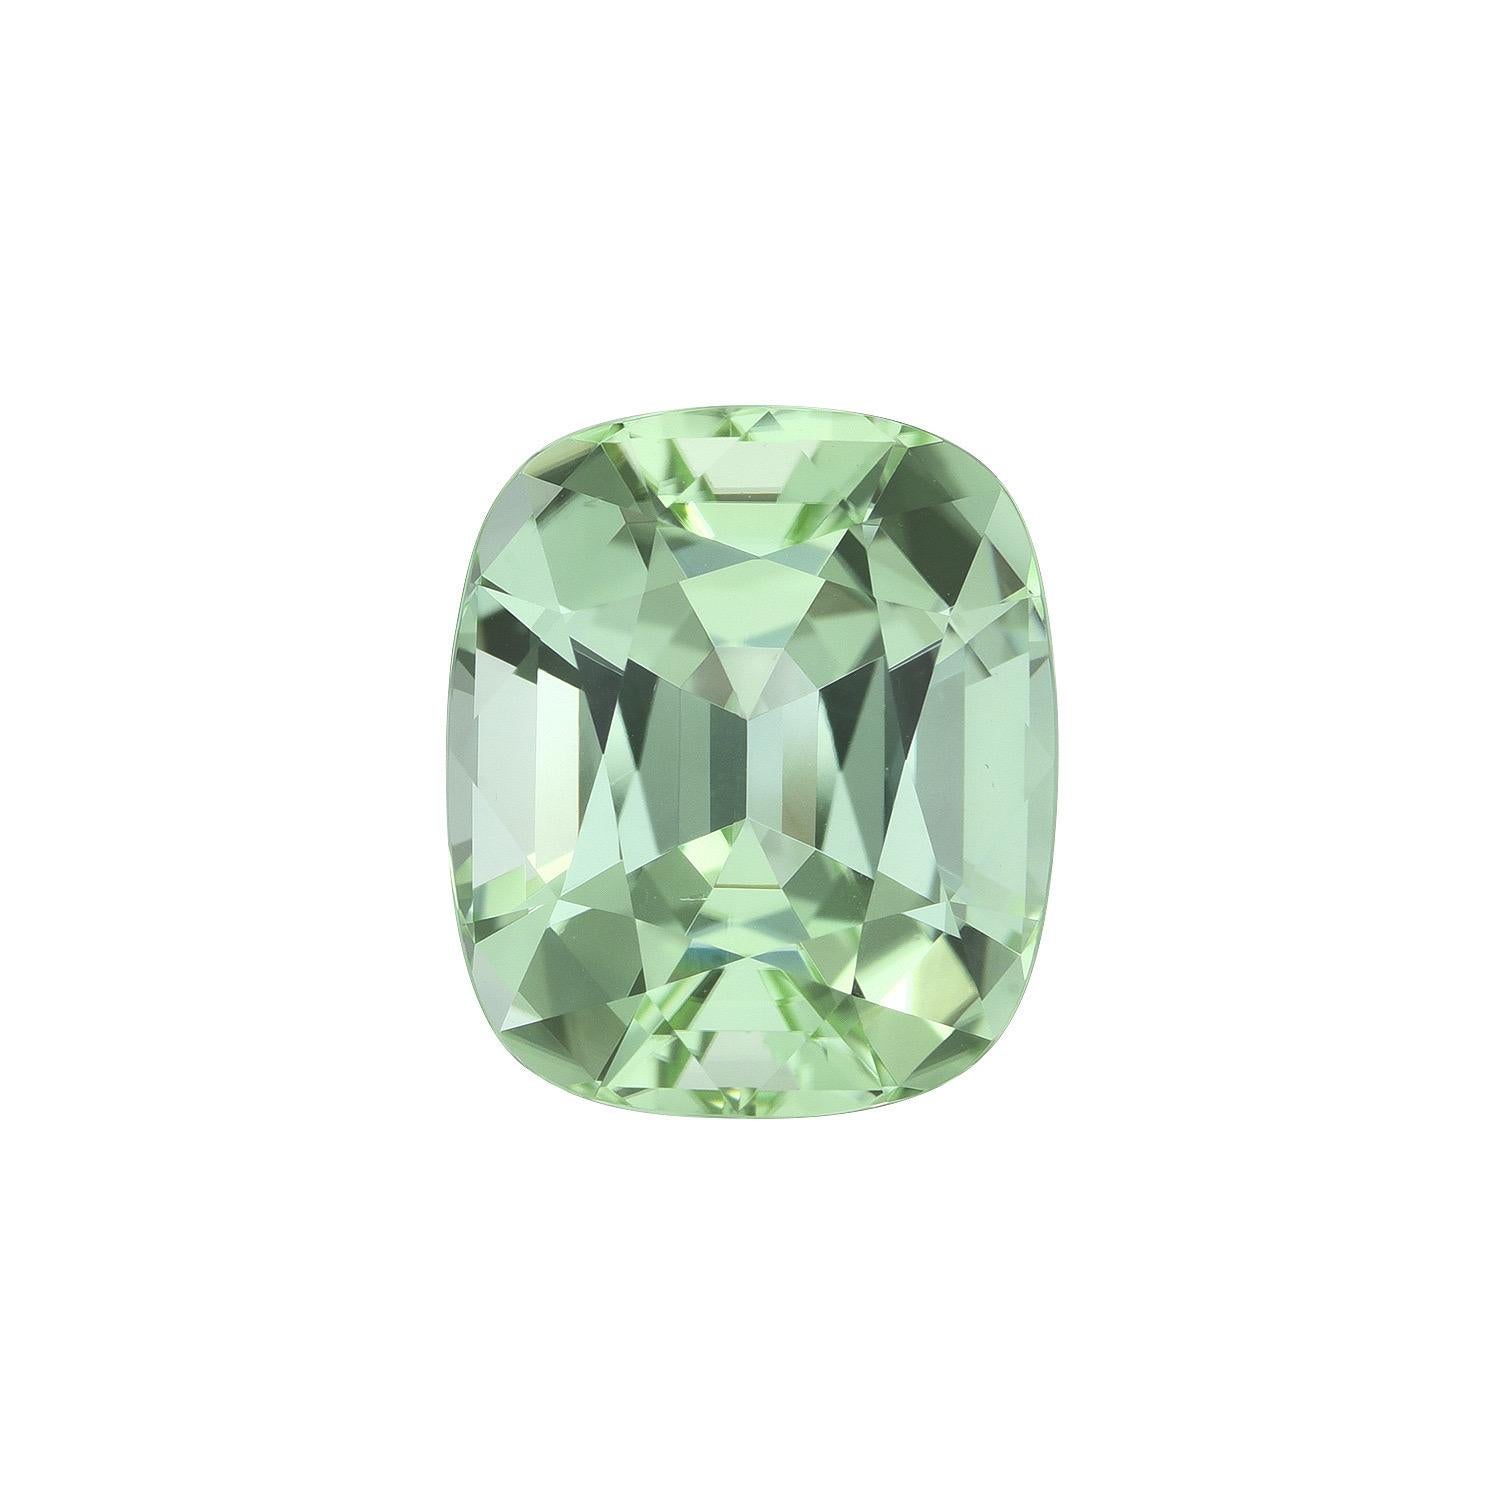 Pristine 7.68 carat Mint Green Tourmaline cushion loose gemstone, offered unmounted to a fine gem lover.
Dimensions: 13 x 11.1 x 8.1 mm.
Returns are accepted and paid by us within 7 days of delivery.
We offer supreme custom jewelry work upon